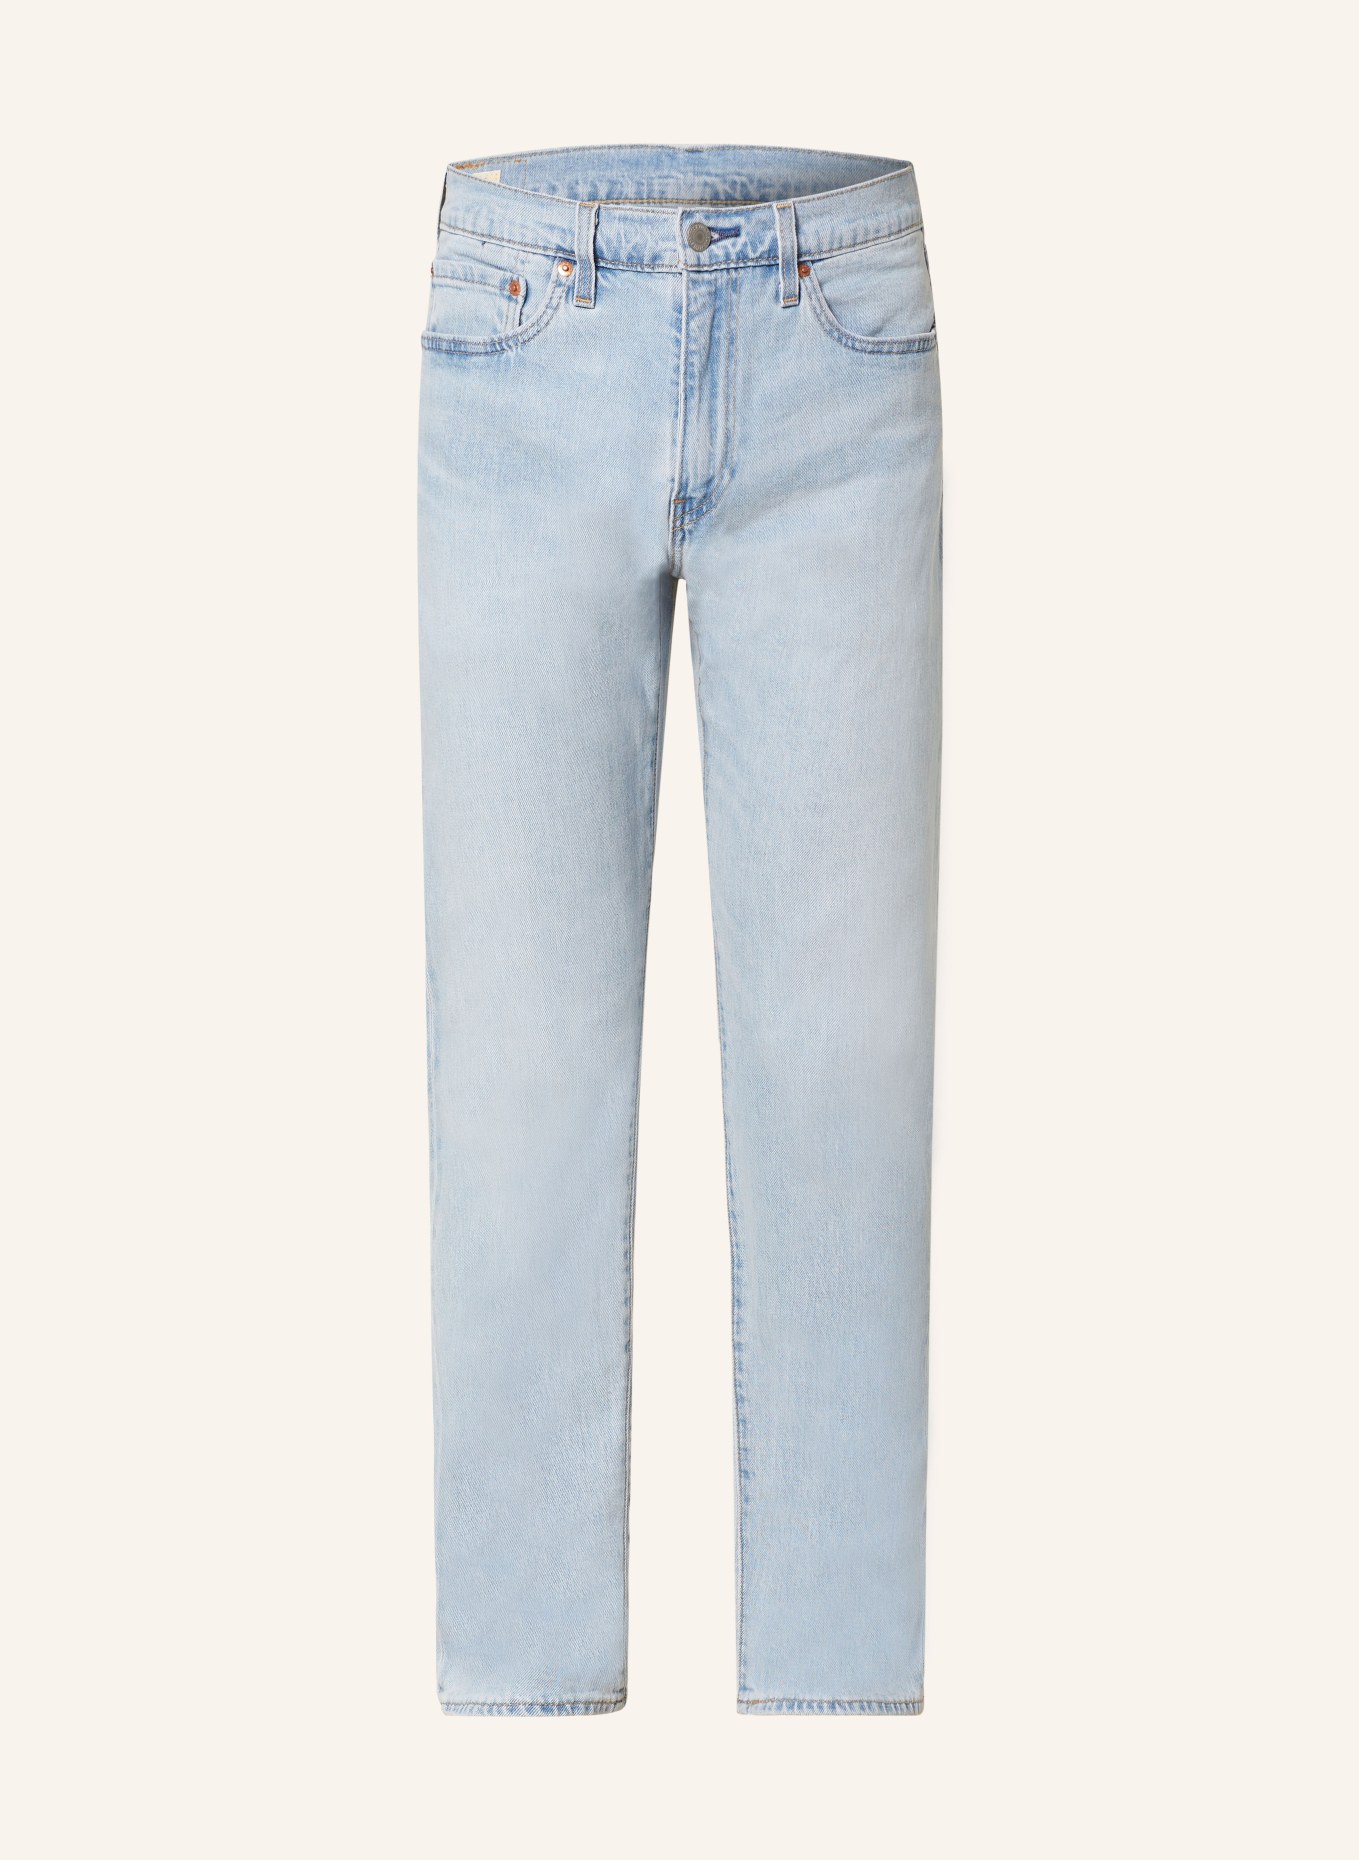 Levi's® Jeans 502 tapered fit, Color: 55 Light Indigo - Worn In (Image 1)